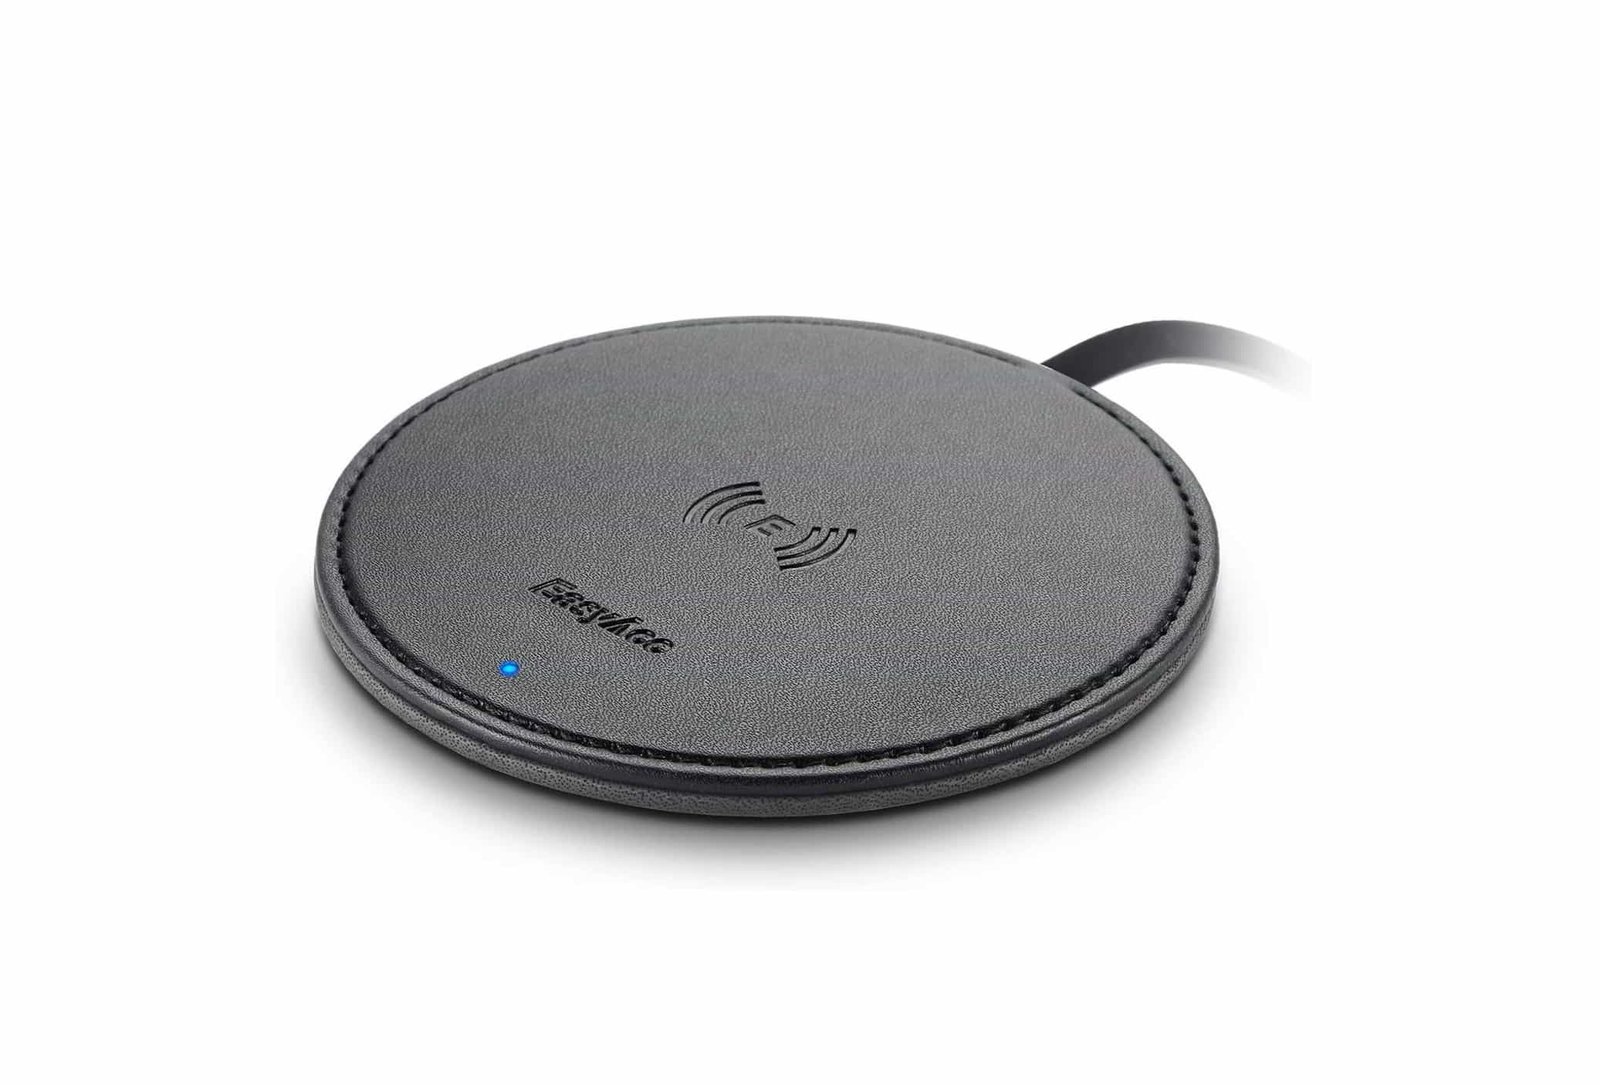 EasyAcc Fast Wireless Charger Pad-min (2)